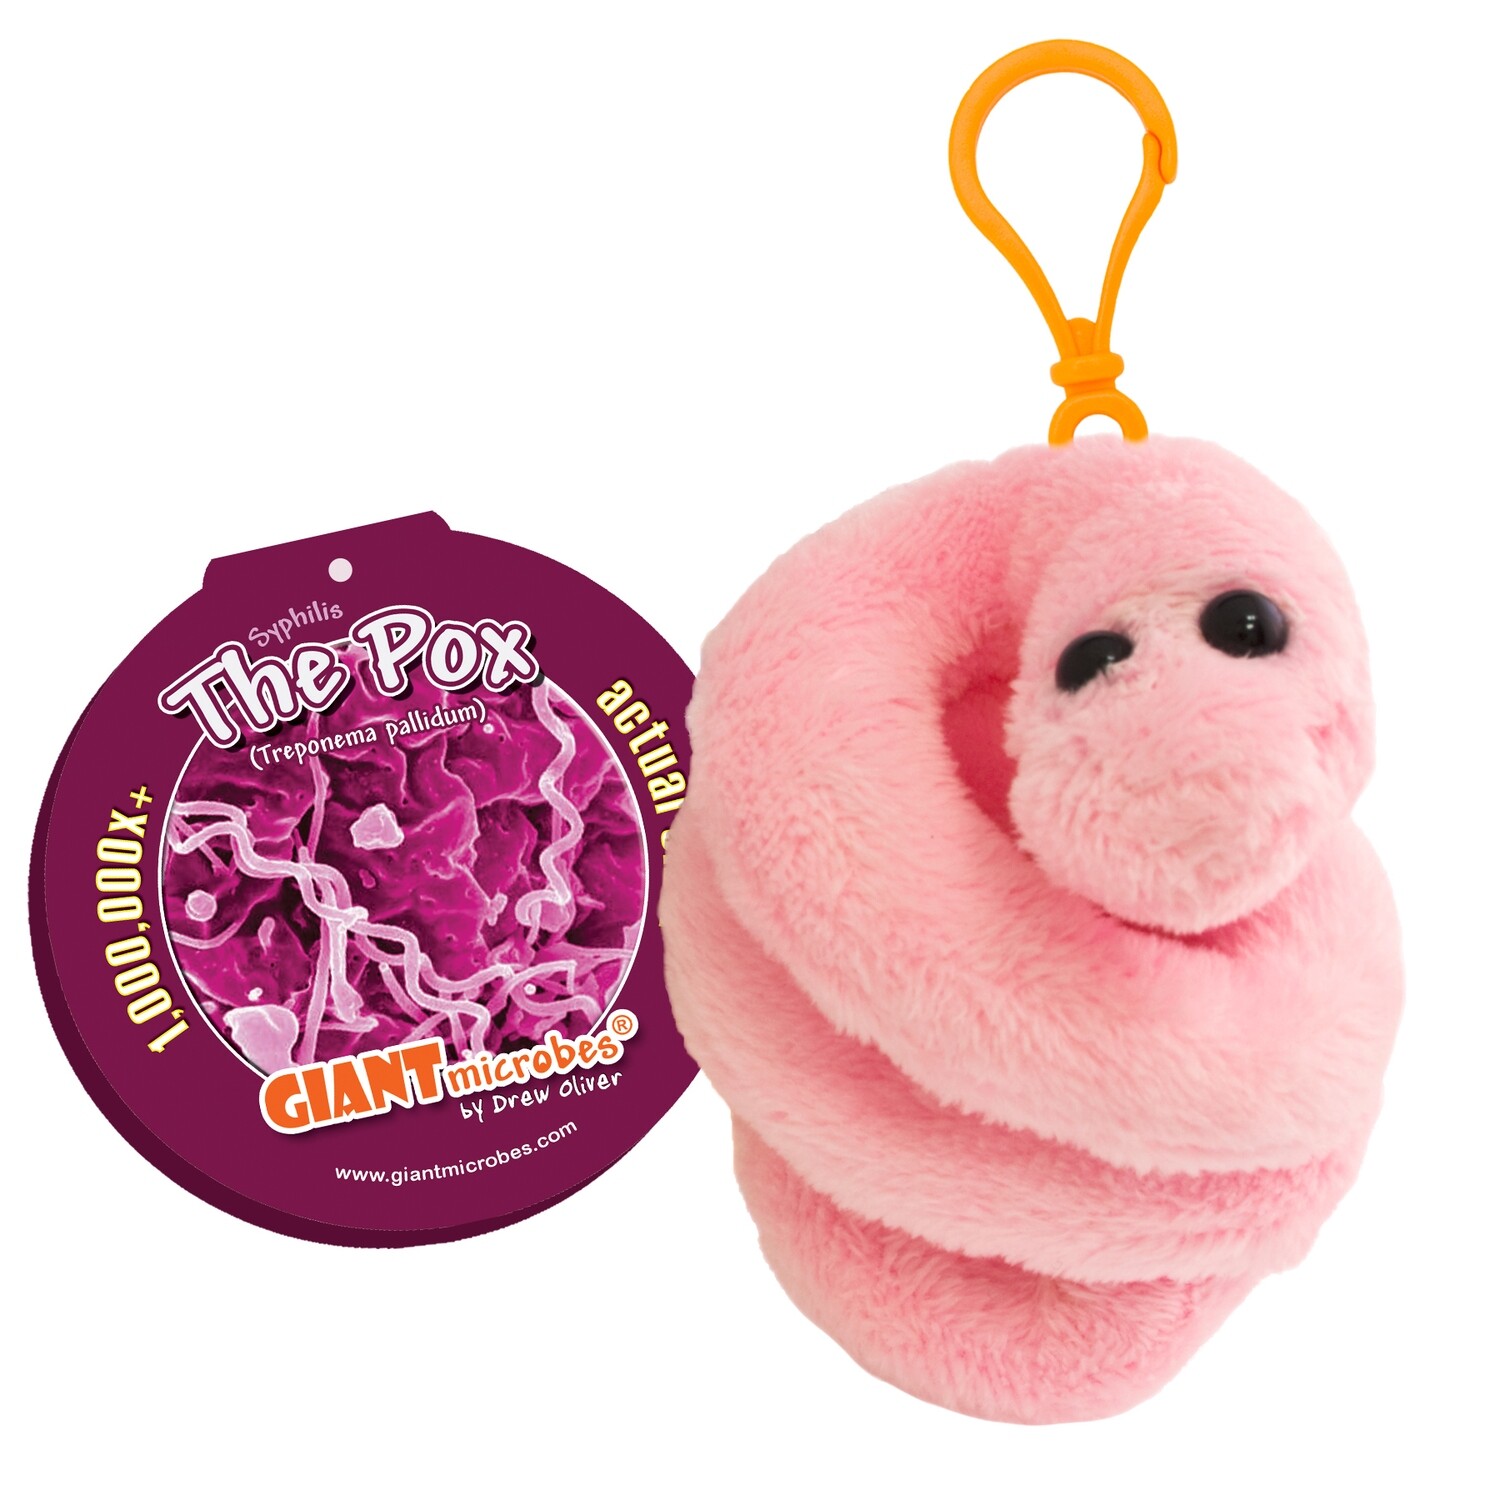 giant microbes